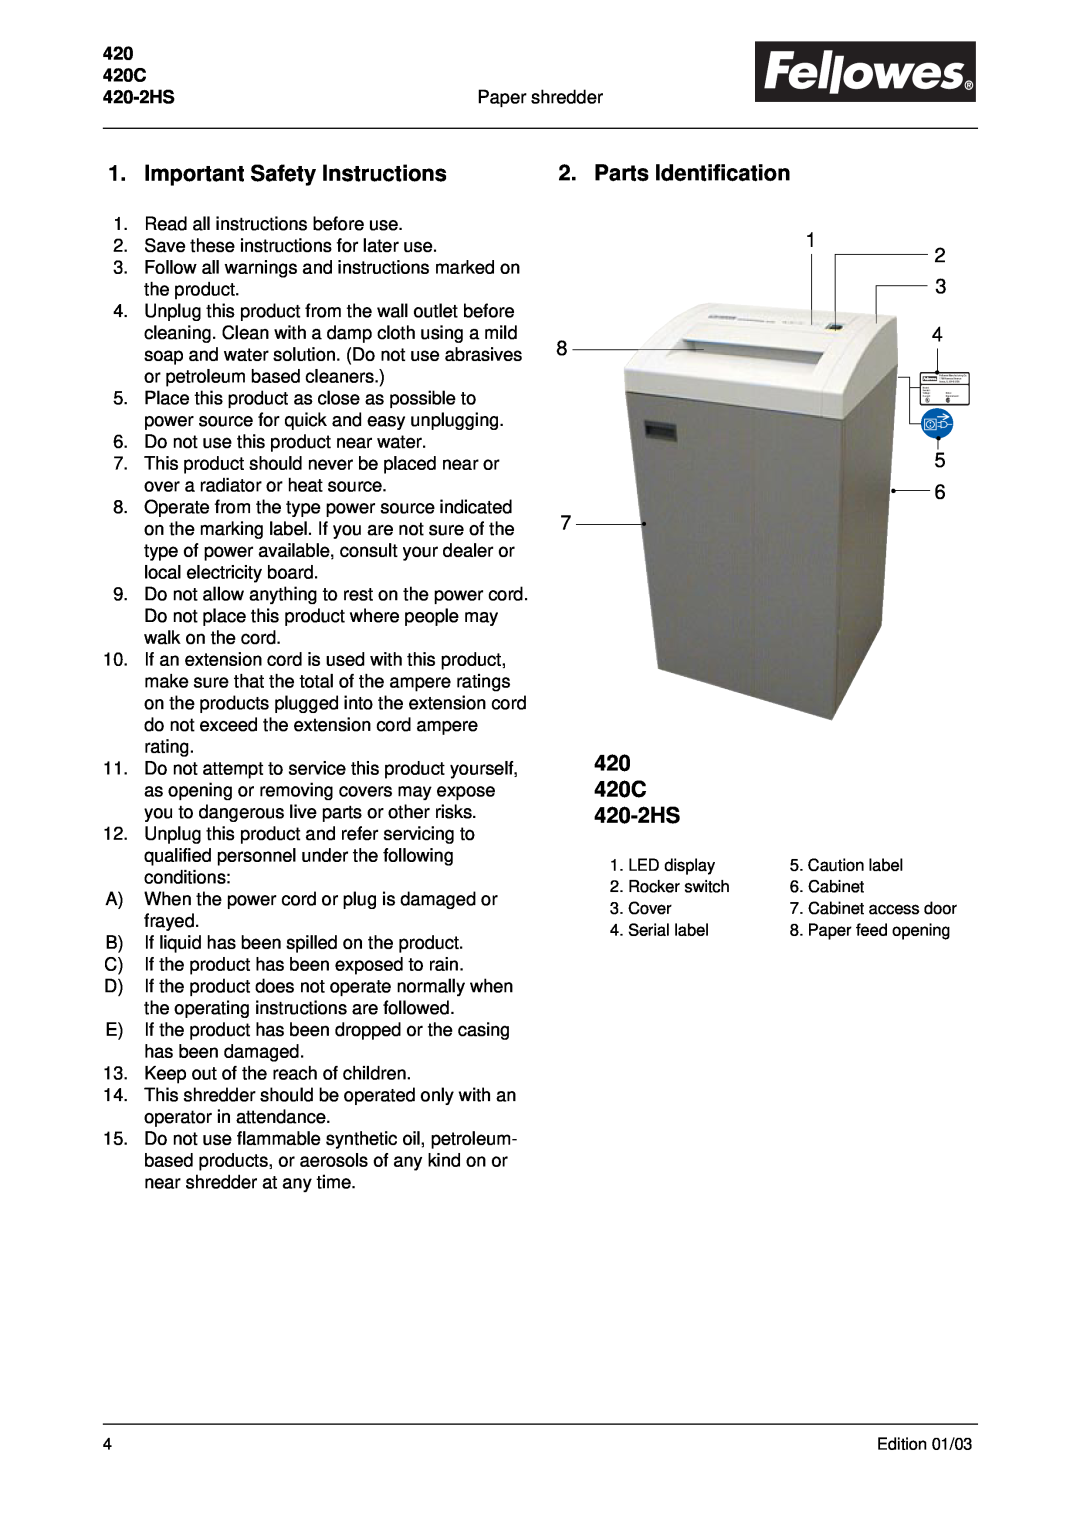 Fellowes manual Important Safety Instructions, Parts Identification, 420 420C 420-2HS 